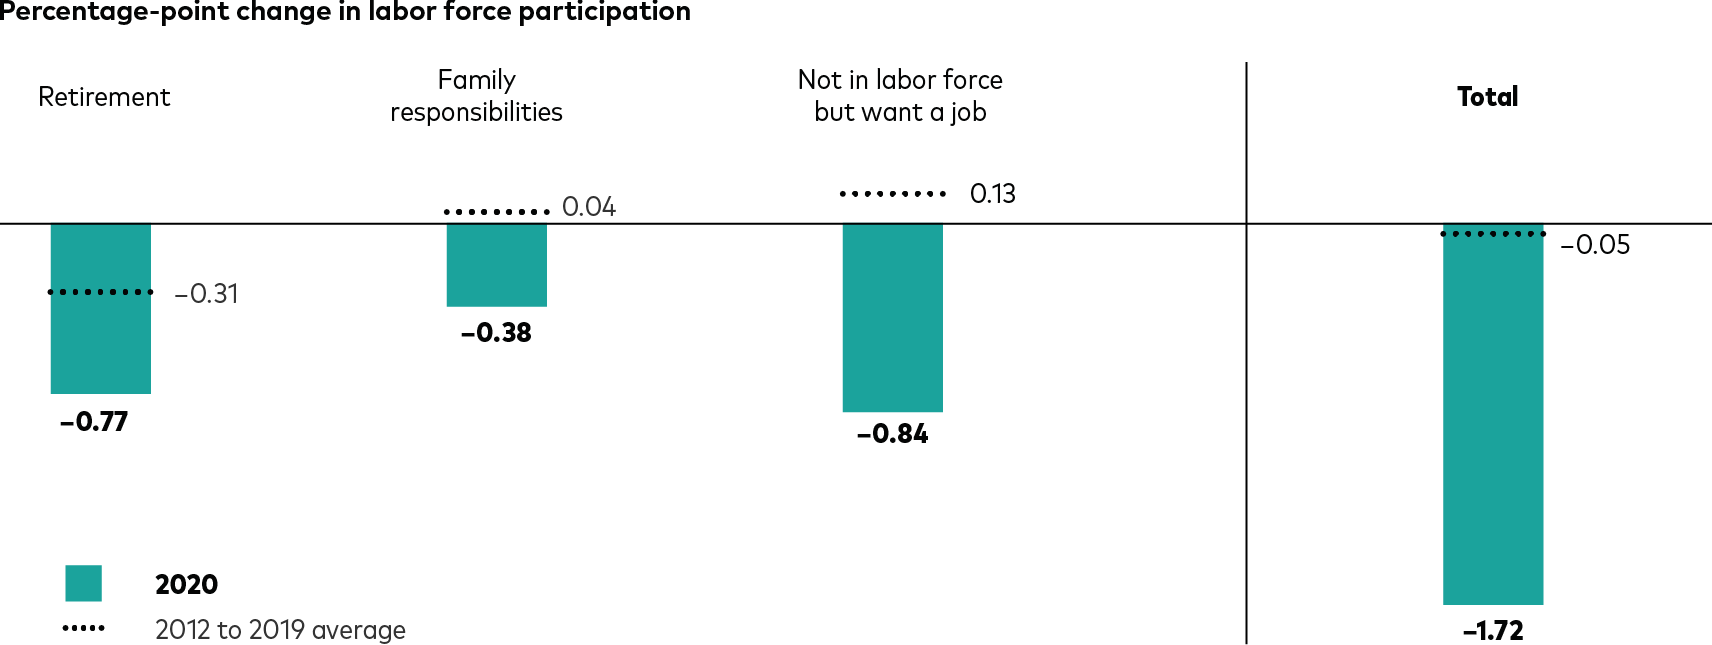 The illustration compares the degree to which people left the labor force in 2020 with an average for the eight preceding years, measured by percentage-point changes in the labor participation rate. The change related to retirement was negative 0.77 point in 2020 compared with a negative 0.31 point average for the prior years. Related to family responsibilities, changes were negative 0.38 point in 2020 compared with positive 0.04 point for the prior years. For “not in labor force but want a job,” changes were negative 0.84 point in 2020 compared with positive 0.13 point for the prior years. And the total changes were negative 1.72 points in 2020 compared with negative 0.05 point for the prior years.